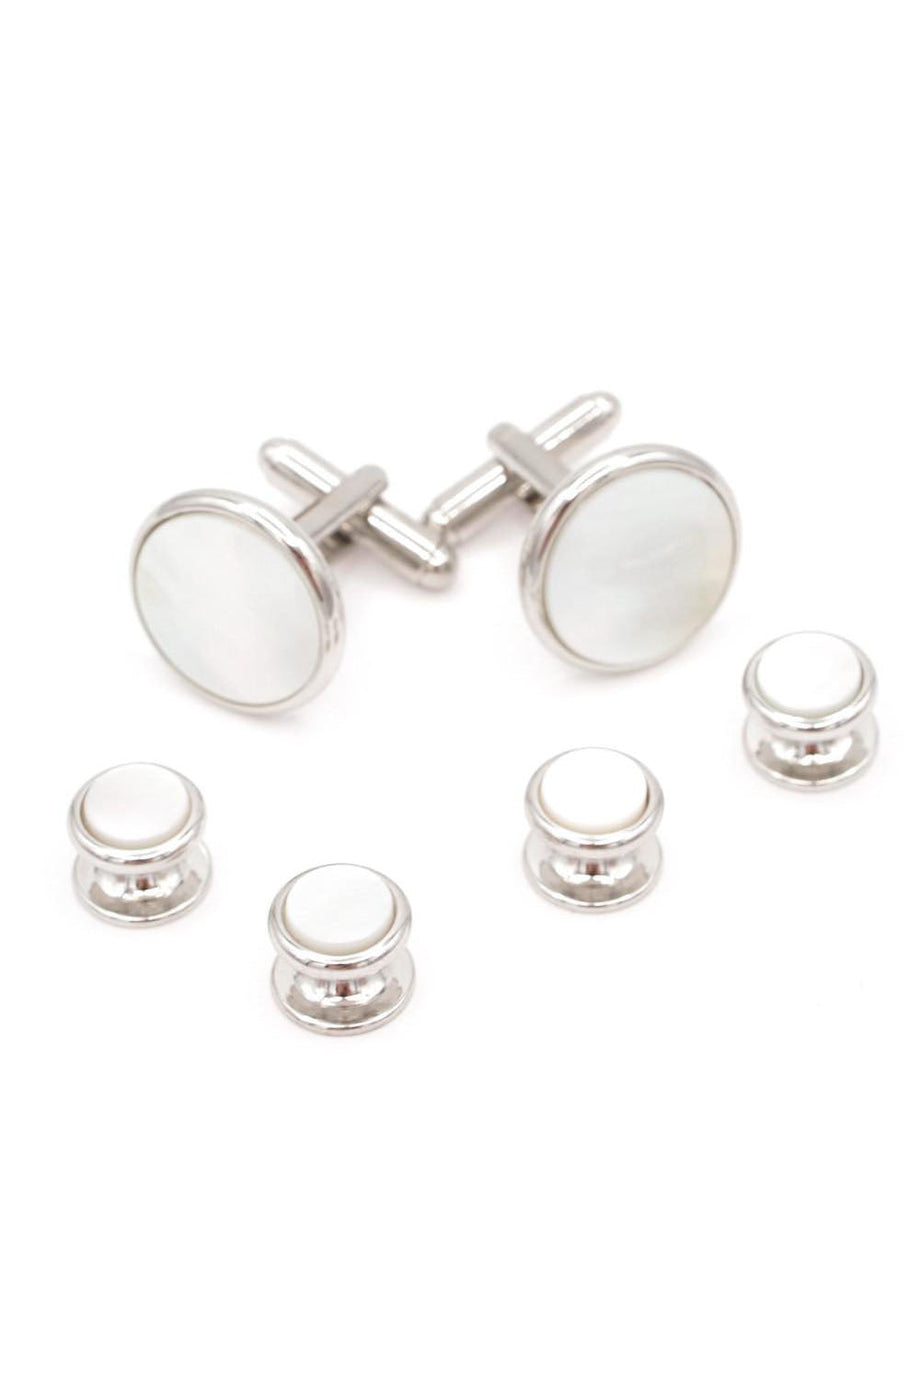 JJ Weston Smooth Edge Mother of Pearl Silver Studs and Cufflinks Set